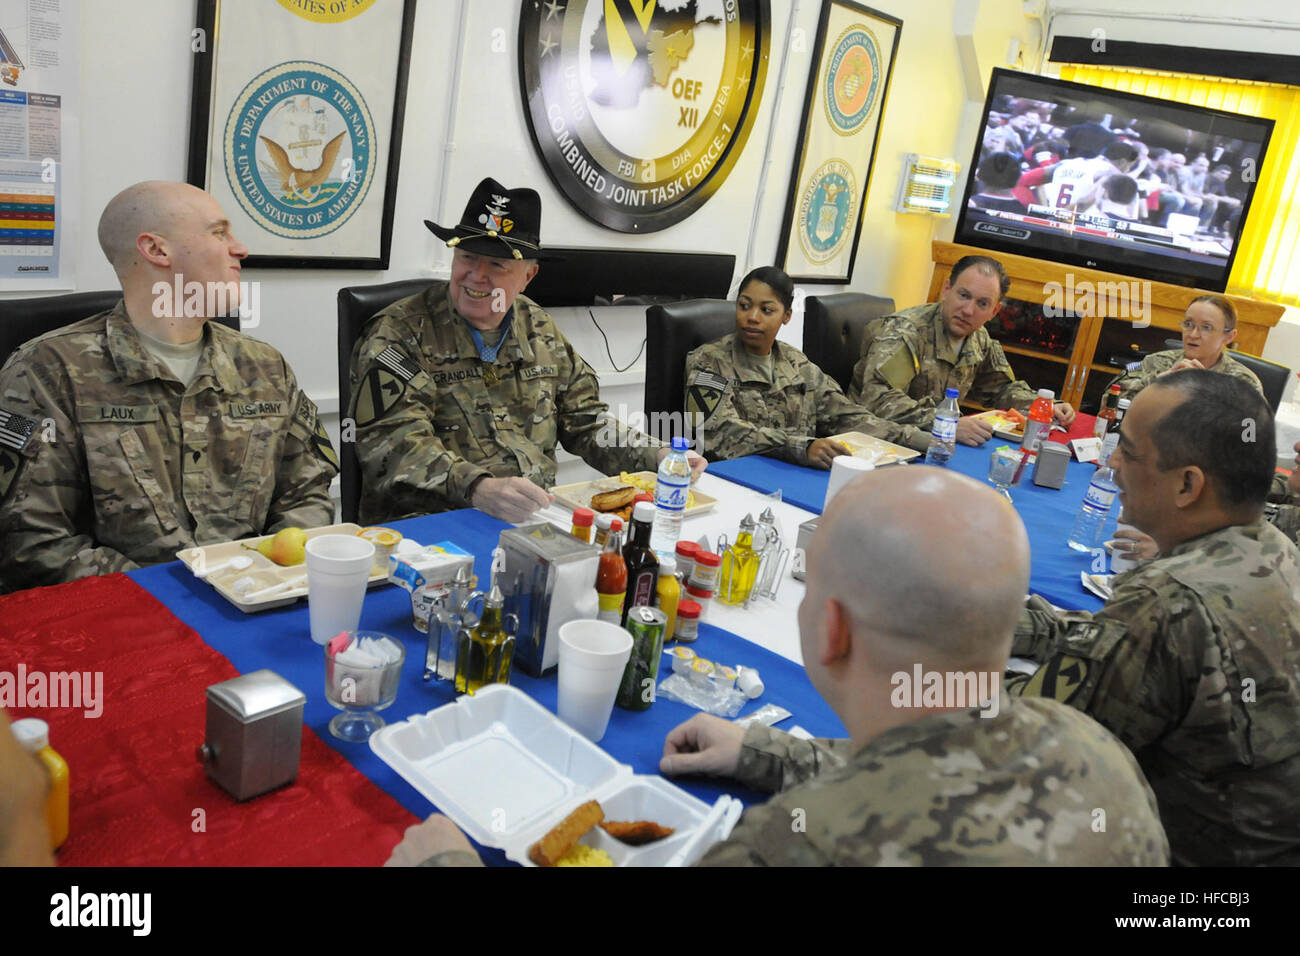 BAGRAM AIRFIELD, Afghanistan –U.S. Army Col. (ret.) Bruce Crandall, a Medal of Honor recipient, enjoys breakfast with soldiers from the Army’s 1st Cavalry Division during a recent tour of Afghanistan April 2. Crandall, 79, was awarded the Medal of Honor for his daring during the Vietnam War’s Battle of la Drang, where he flew an unarmed helicopter numerous times into intense enemy fire to medevac wounded soldiers. (U.S. Navy photo by MC1 Bill Steele, 7th Mobile Public Affairs Detachment) Medal of Honor recipient %%%%%%%%E2%%%%%%%%80%%%%%%%%98Cav all the way through%%%%%%%%E2%%%%%%%%80%%%%%%%%9 Stock Photo